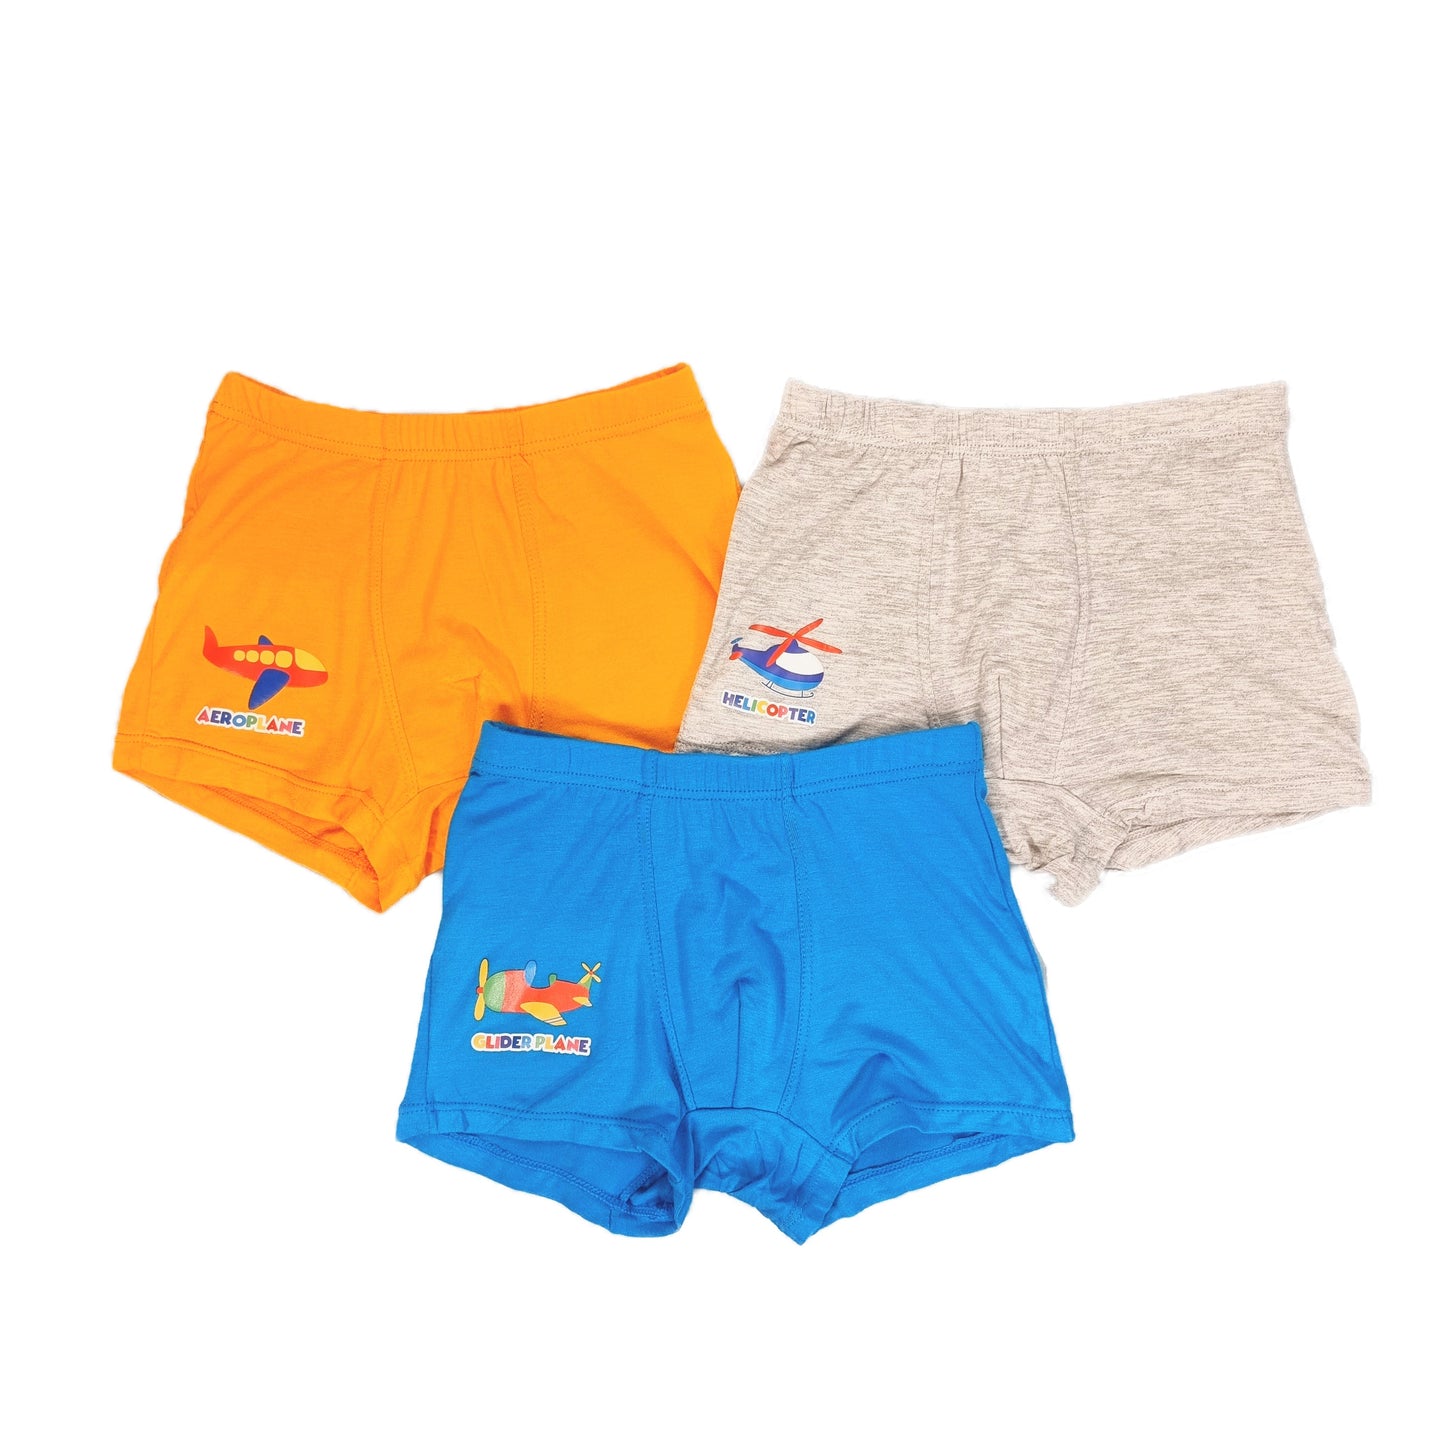 Boys Boxer Briefs (Pack of 3) - Planes